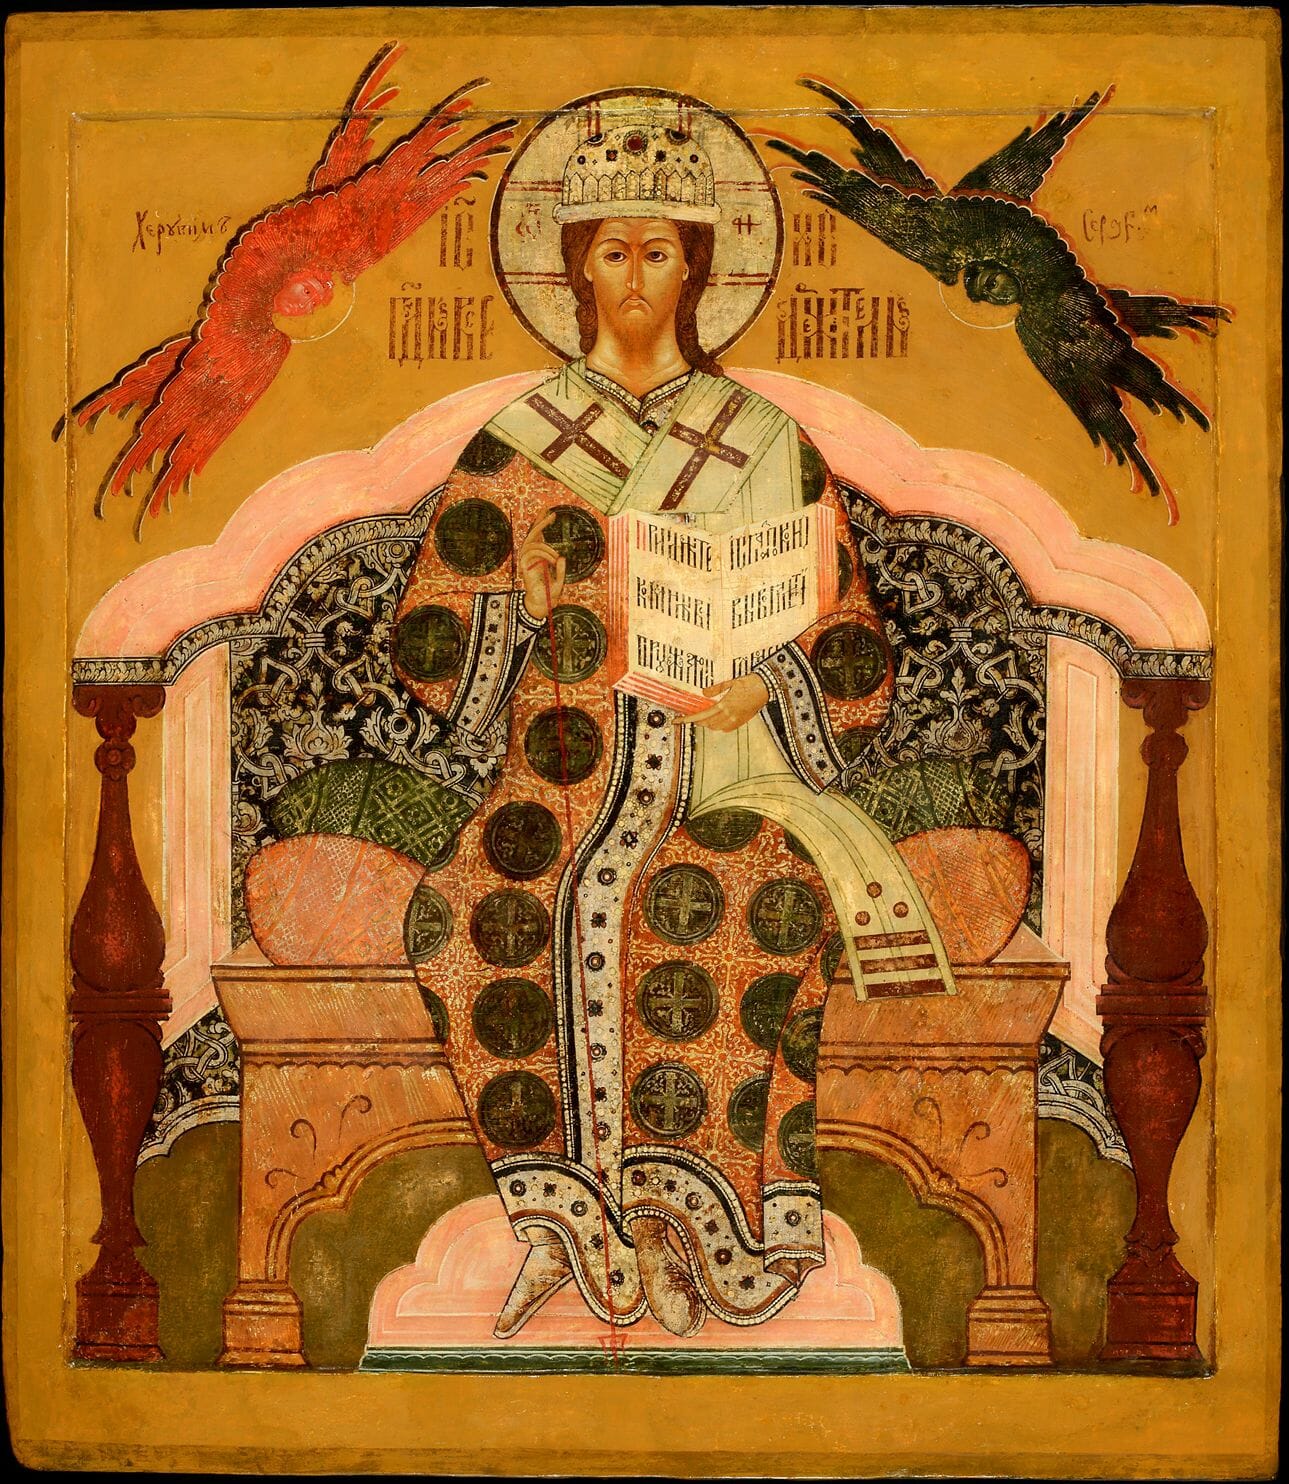 Christ Enthroned as High Priest, Russia, Kostroma region, Mid 17th cent. 98 x 85 cm. Collection: Jan Morsink Ikonen, Amsterdam, The Netherlands. A good example of a style that leans more towards abstraction. 